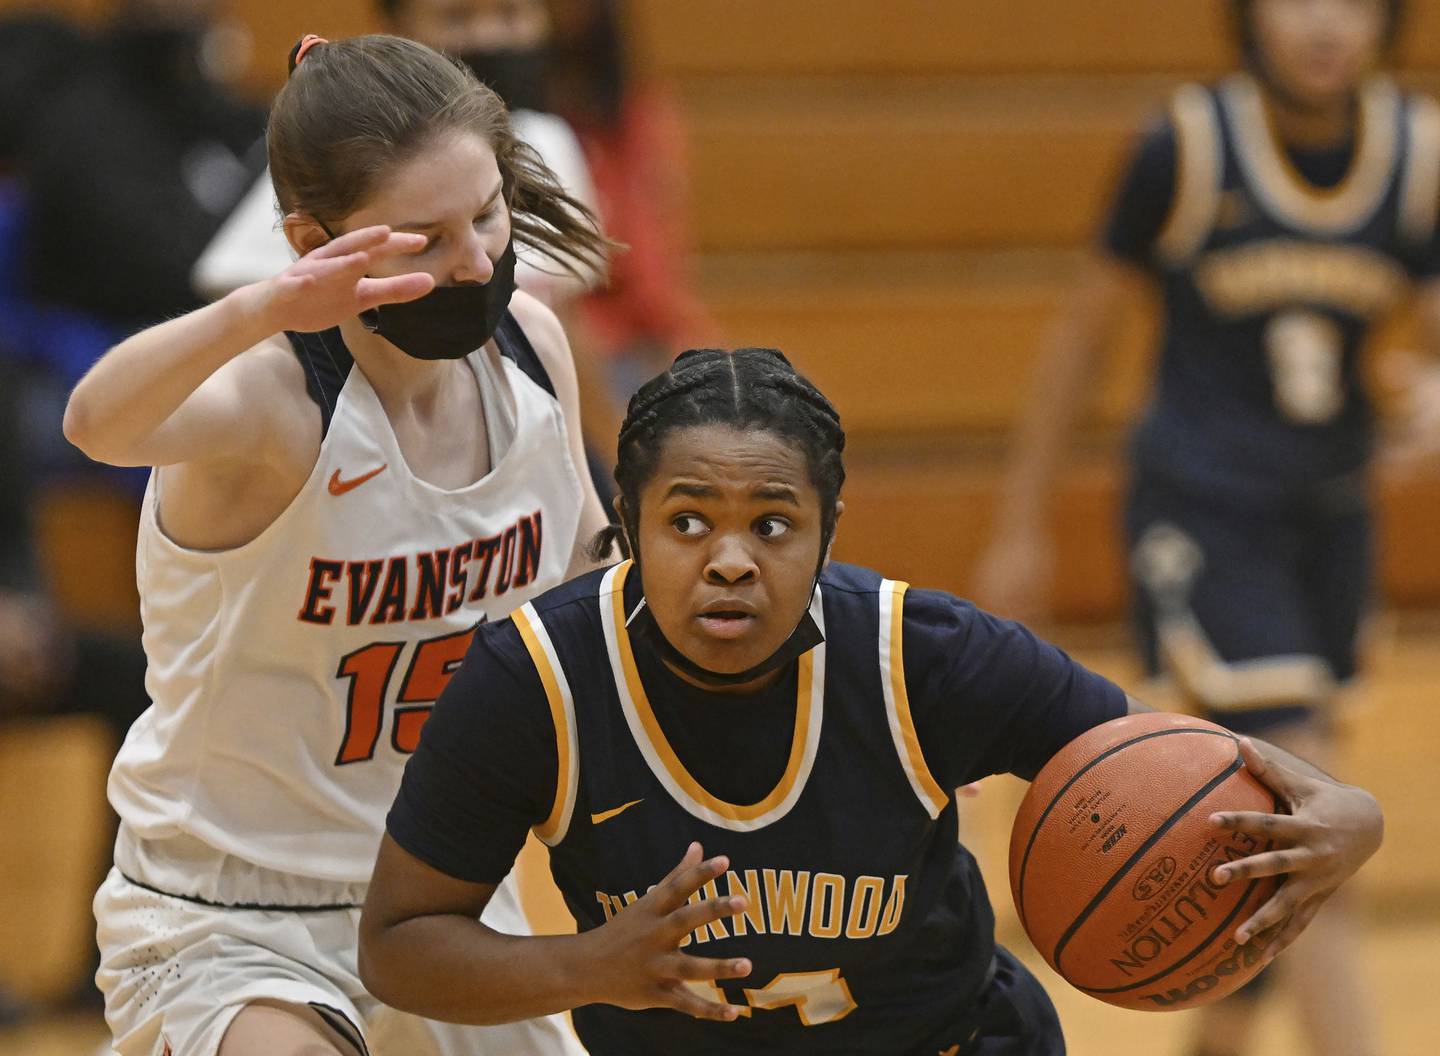 Thornwood's Trinity Chears (14) drives past Evanston's Ellie Oif (15) during a nonconference game on Monday, Jan. 17, 2022.